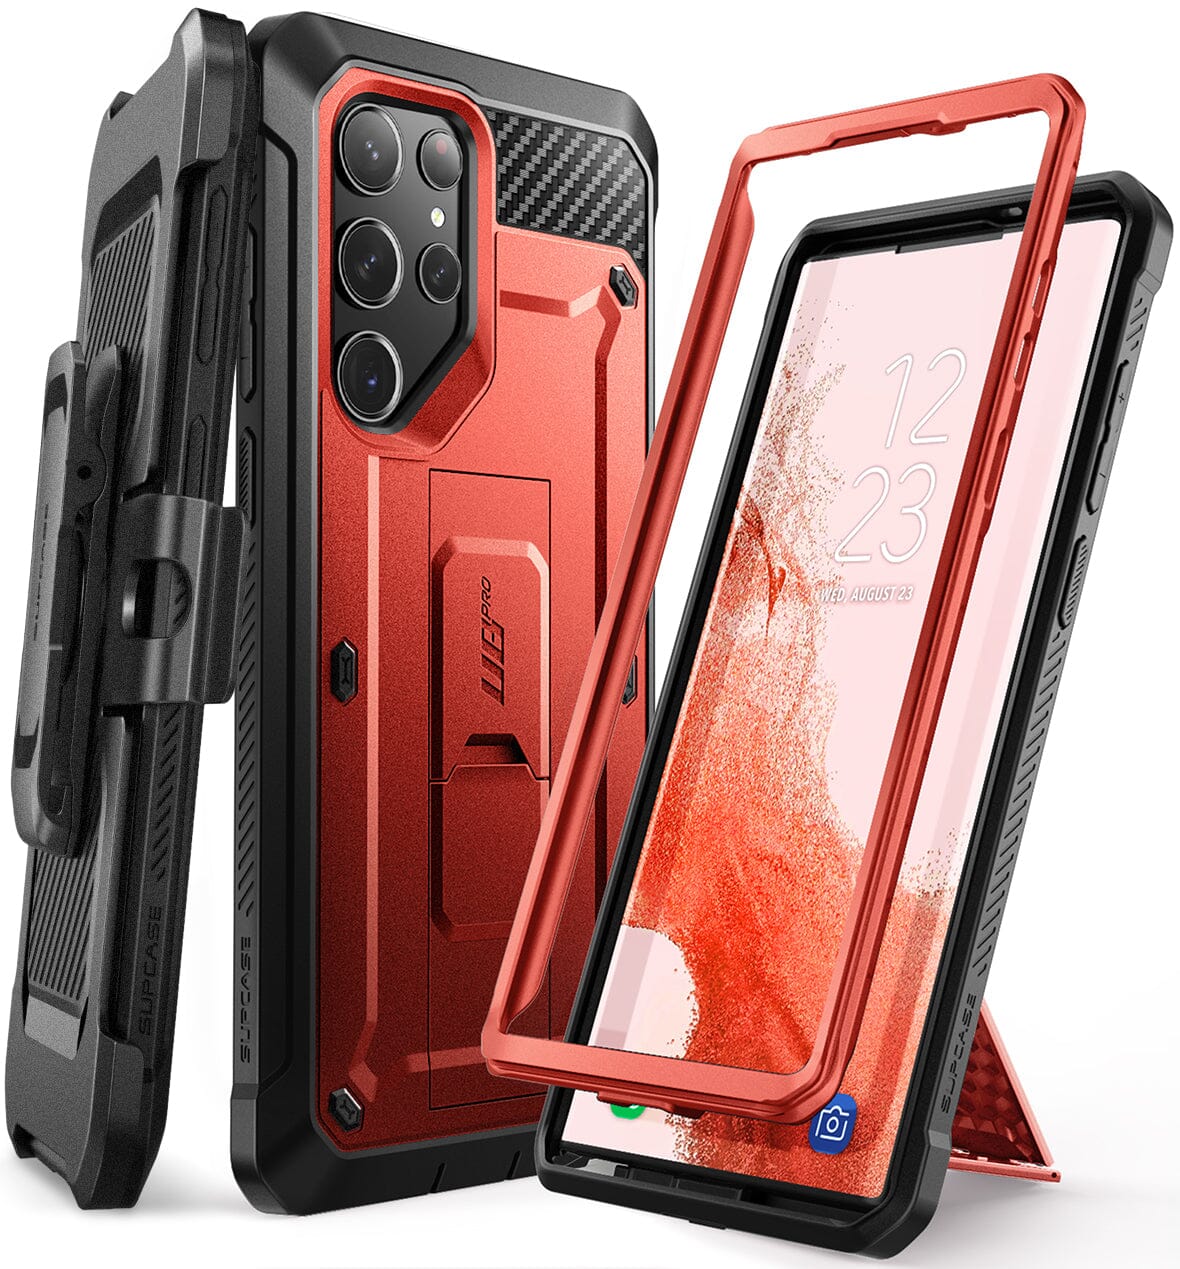 SUPCASE Unicorn Beetle Pro Series Case Designed for Galaxy S23 Series 5G (2023 Release), Full-Body Dual Layer Rugged Holster & Kickstand Case Without Built-in Screen Protector ONE2WORLD Metallic Red S23 Ultra 